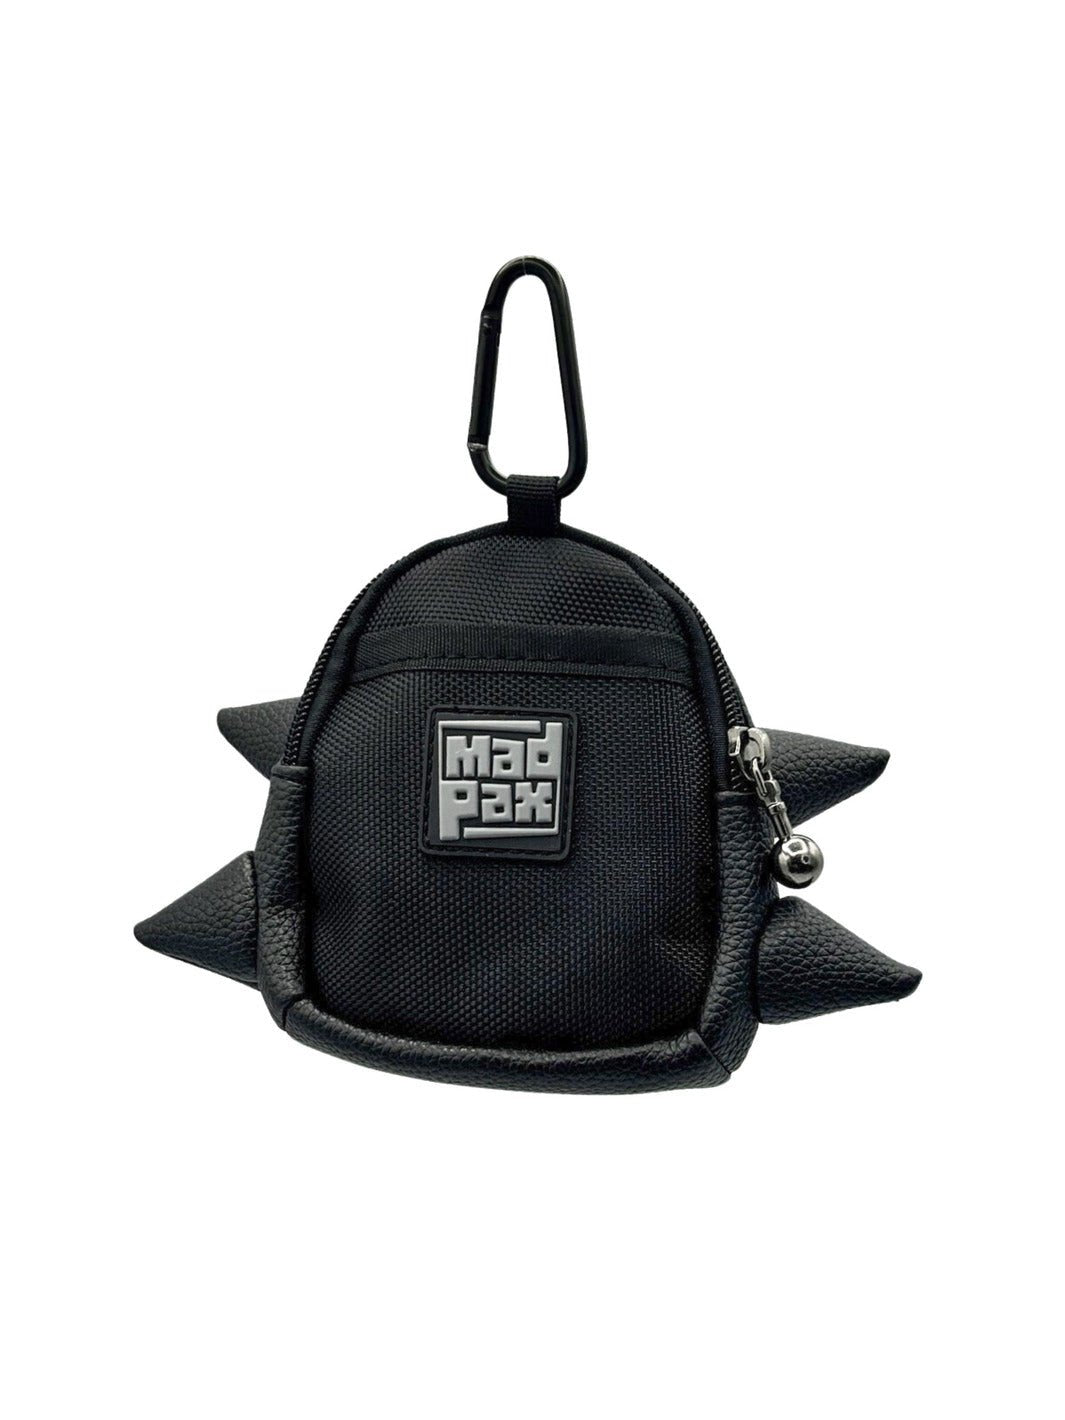 Got Your Black - Clip On Bag - Madpax